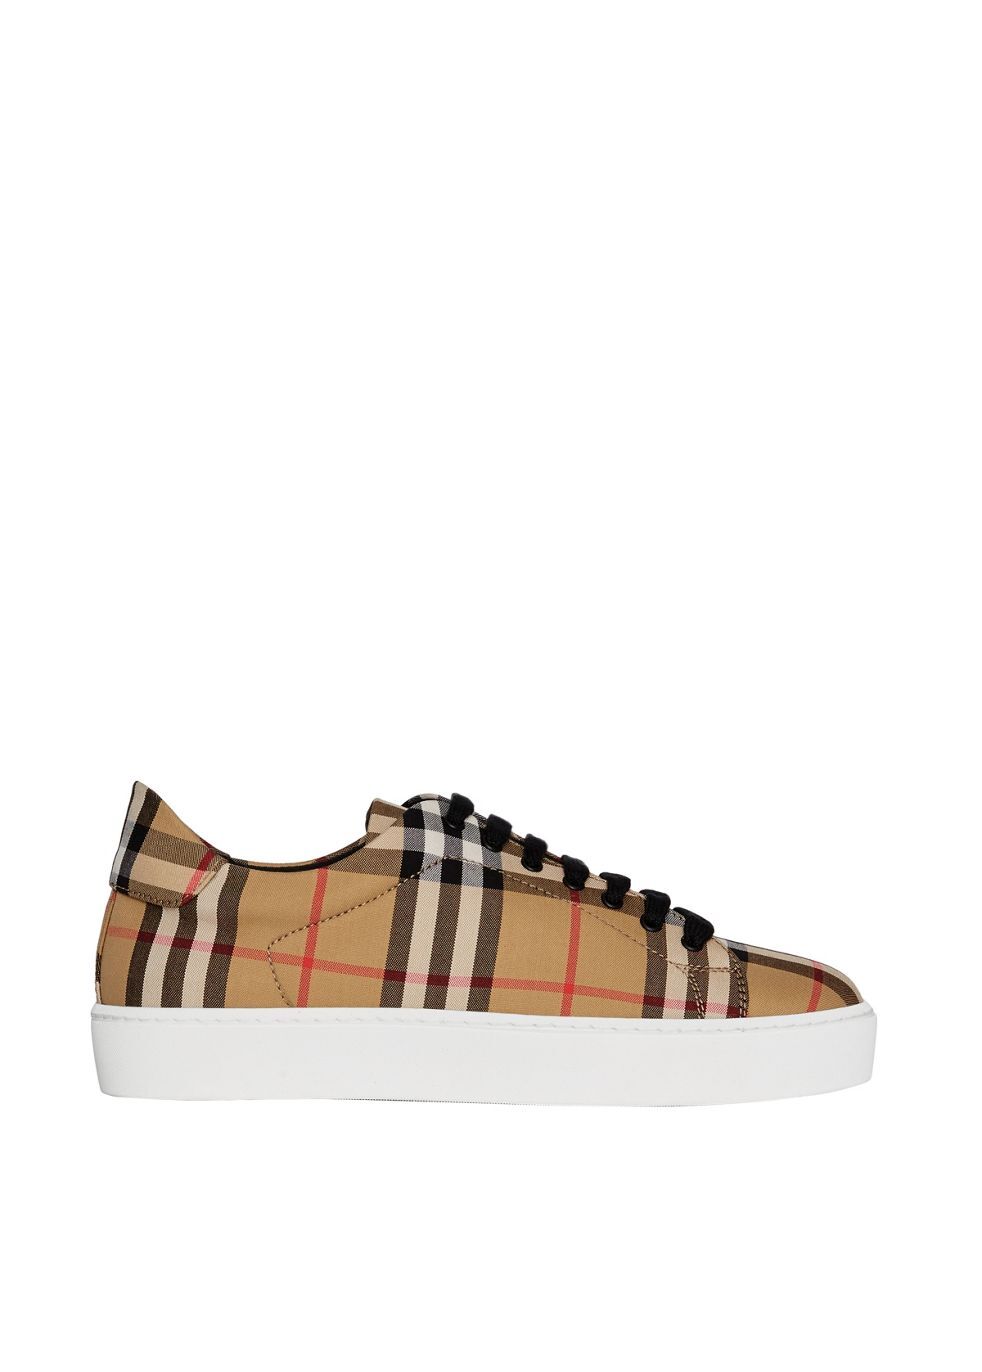 burberry womens trainers